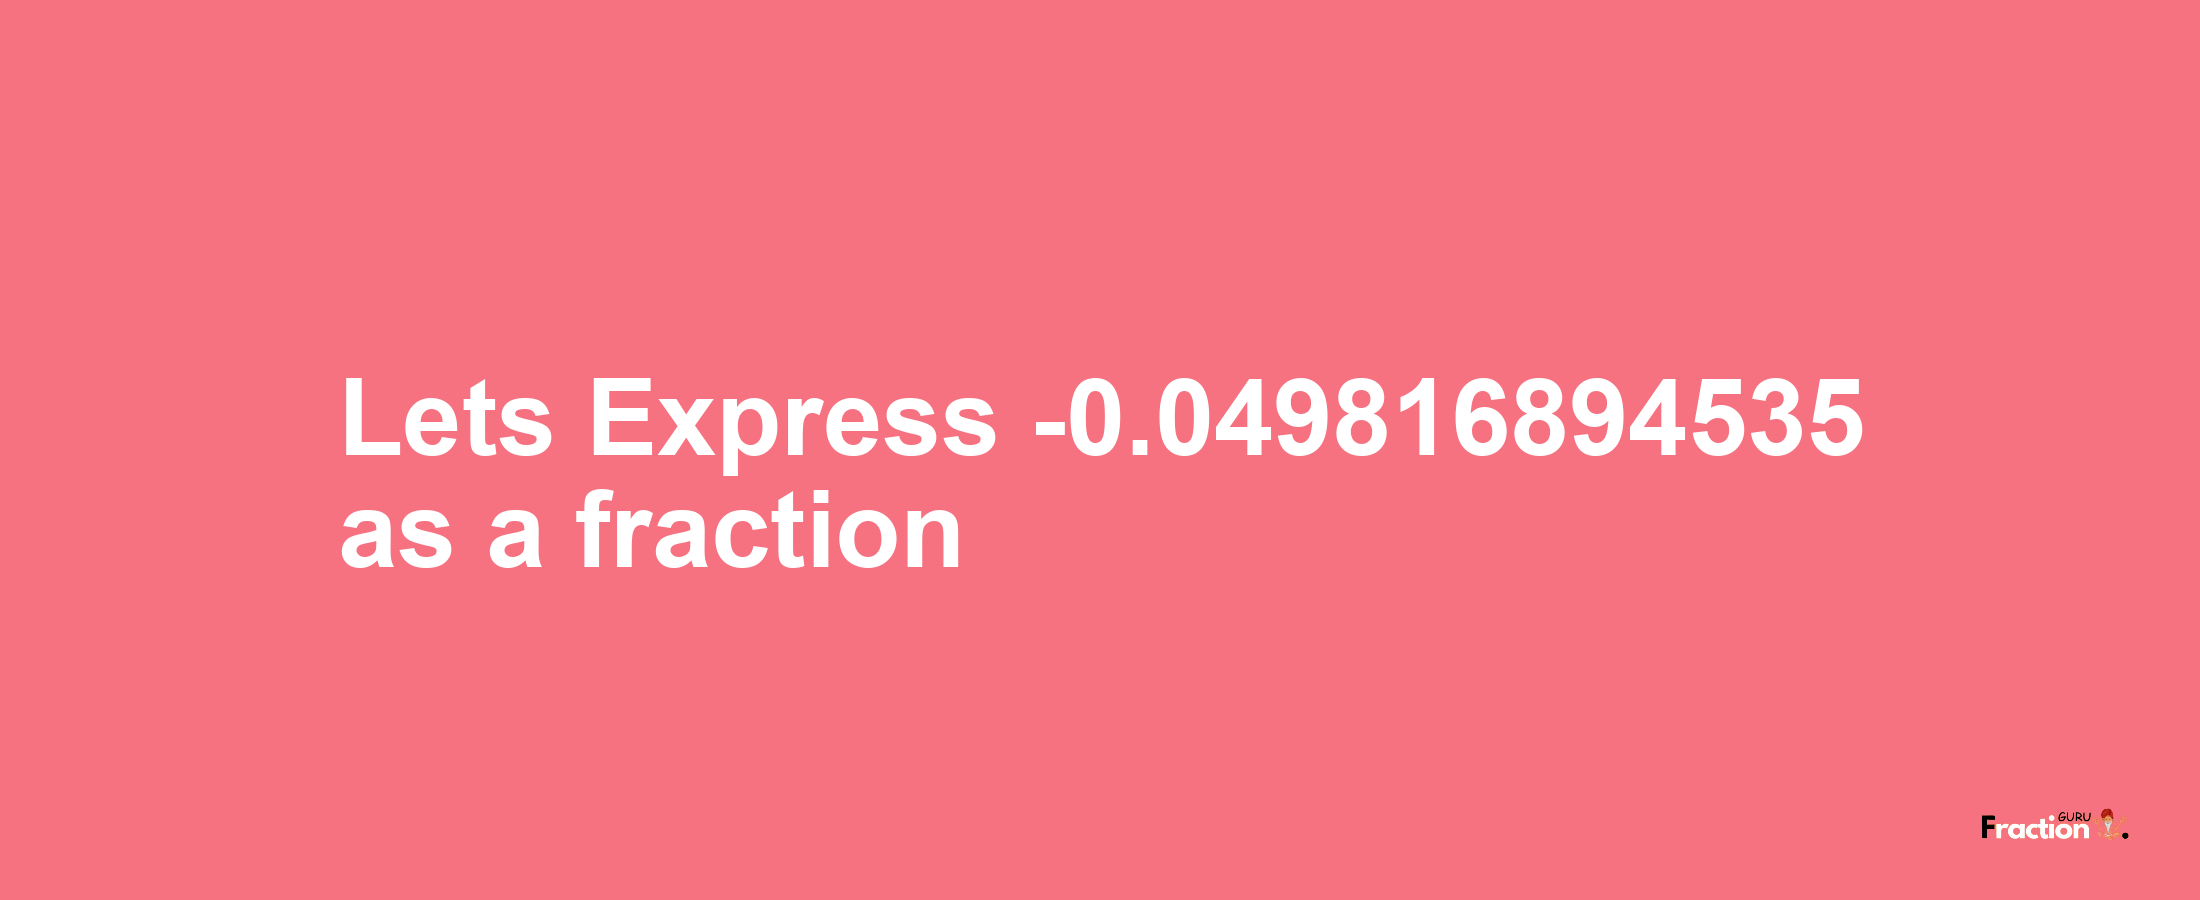 Lets Express -0.049816894535 as afraction